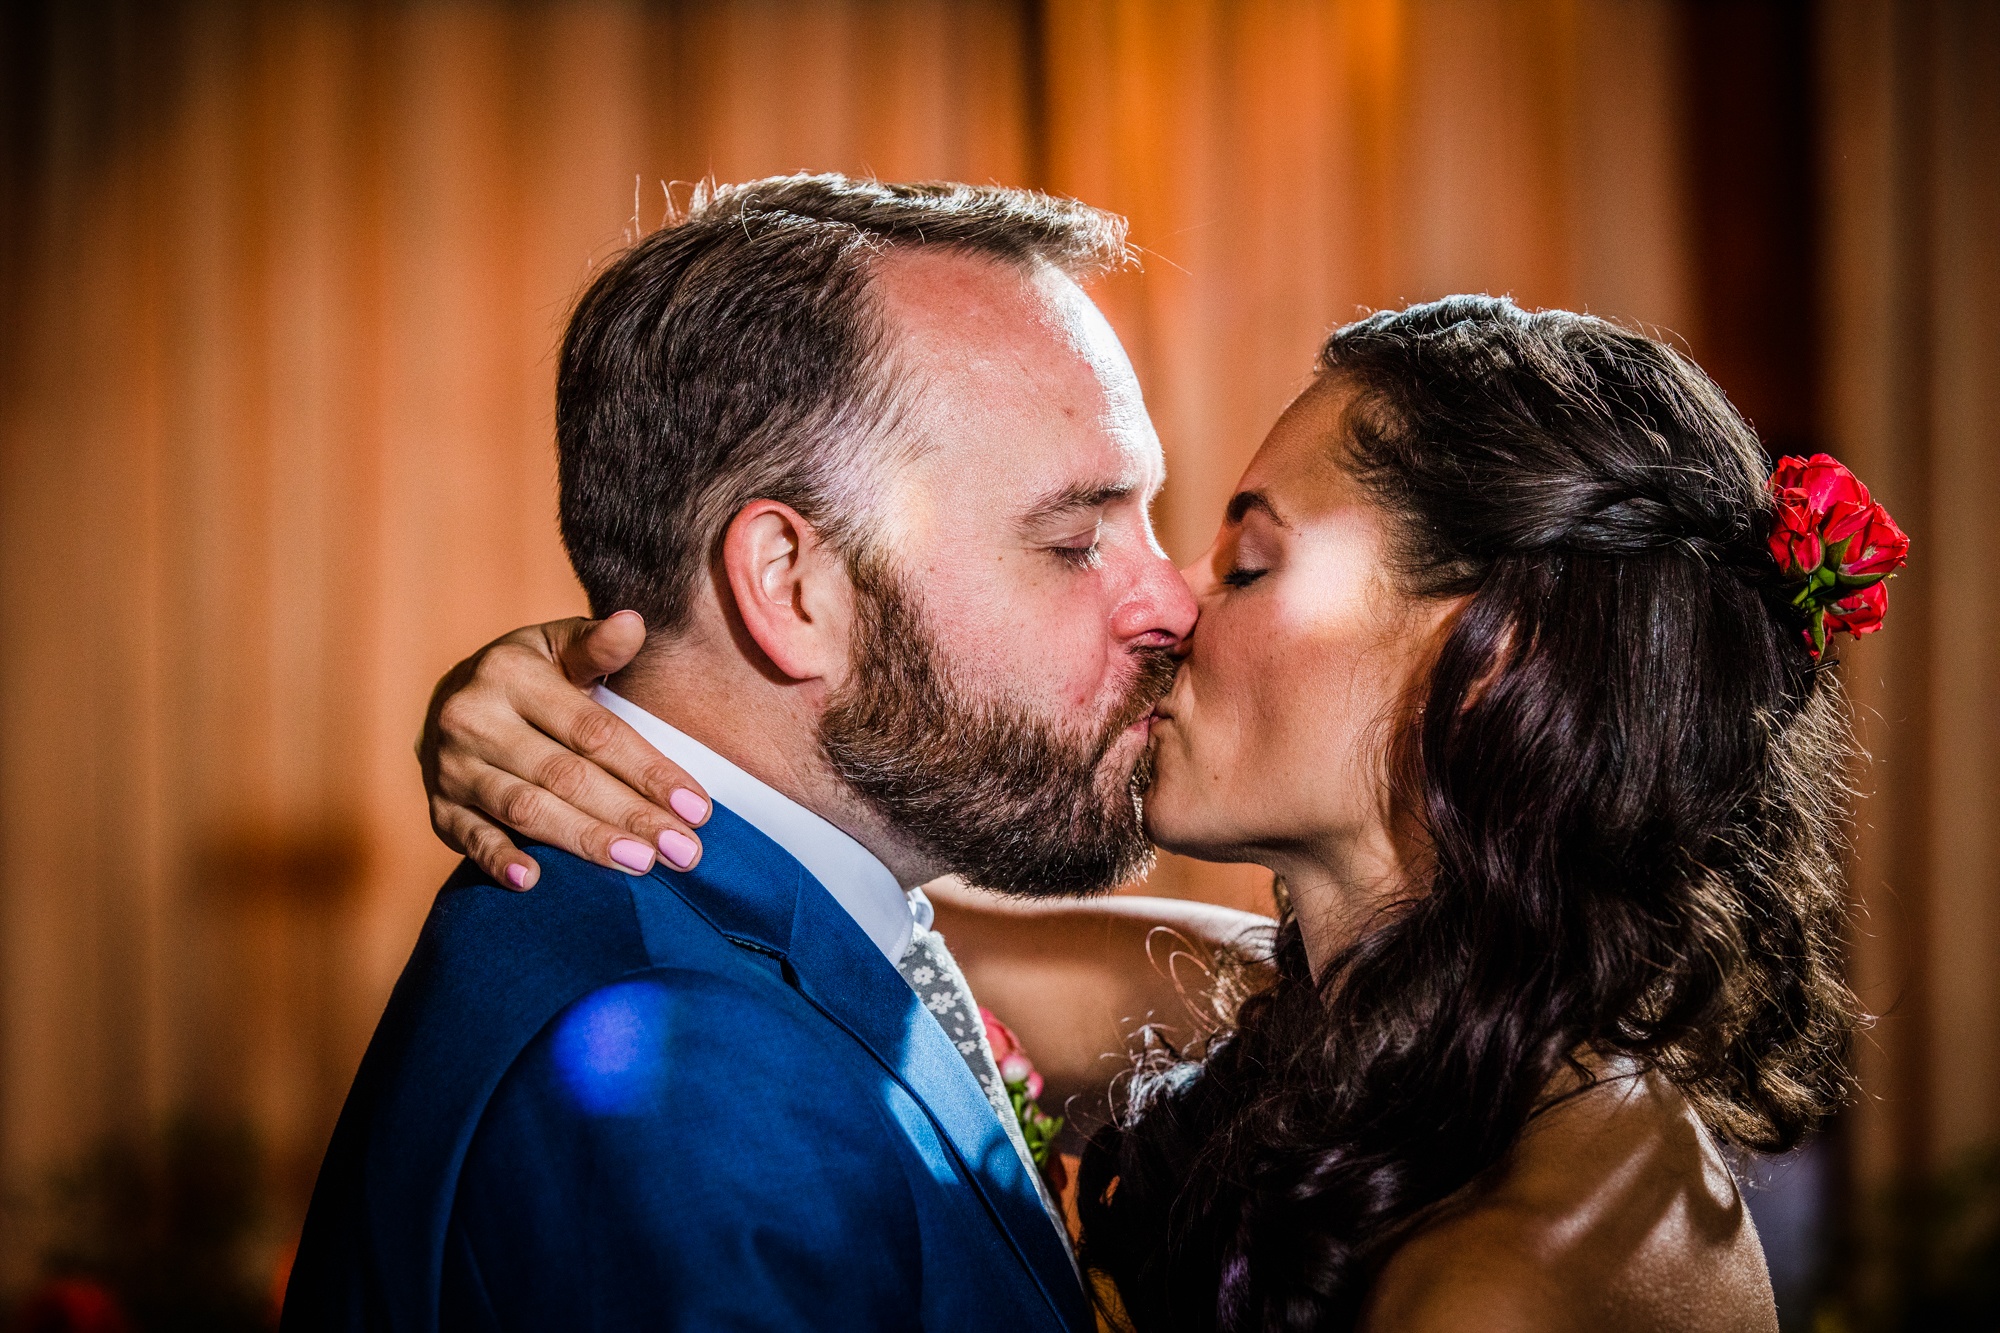 A couple shares their first dance during a Hideout Chicago wedding reception